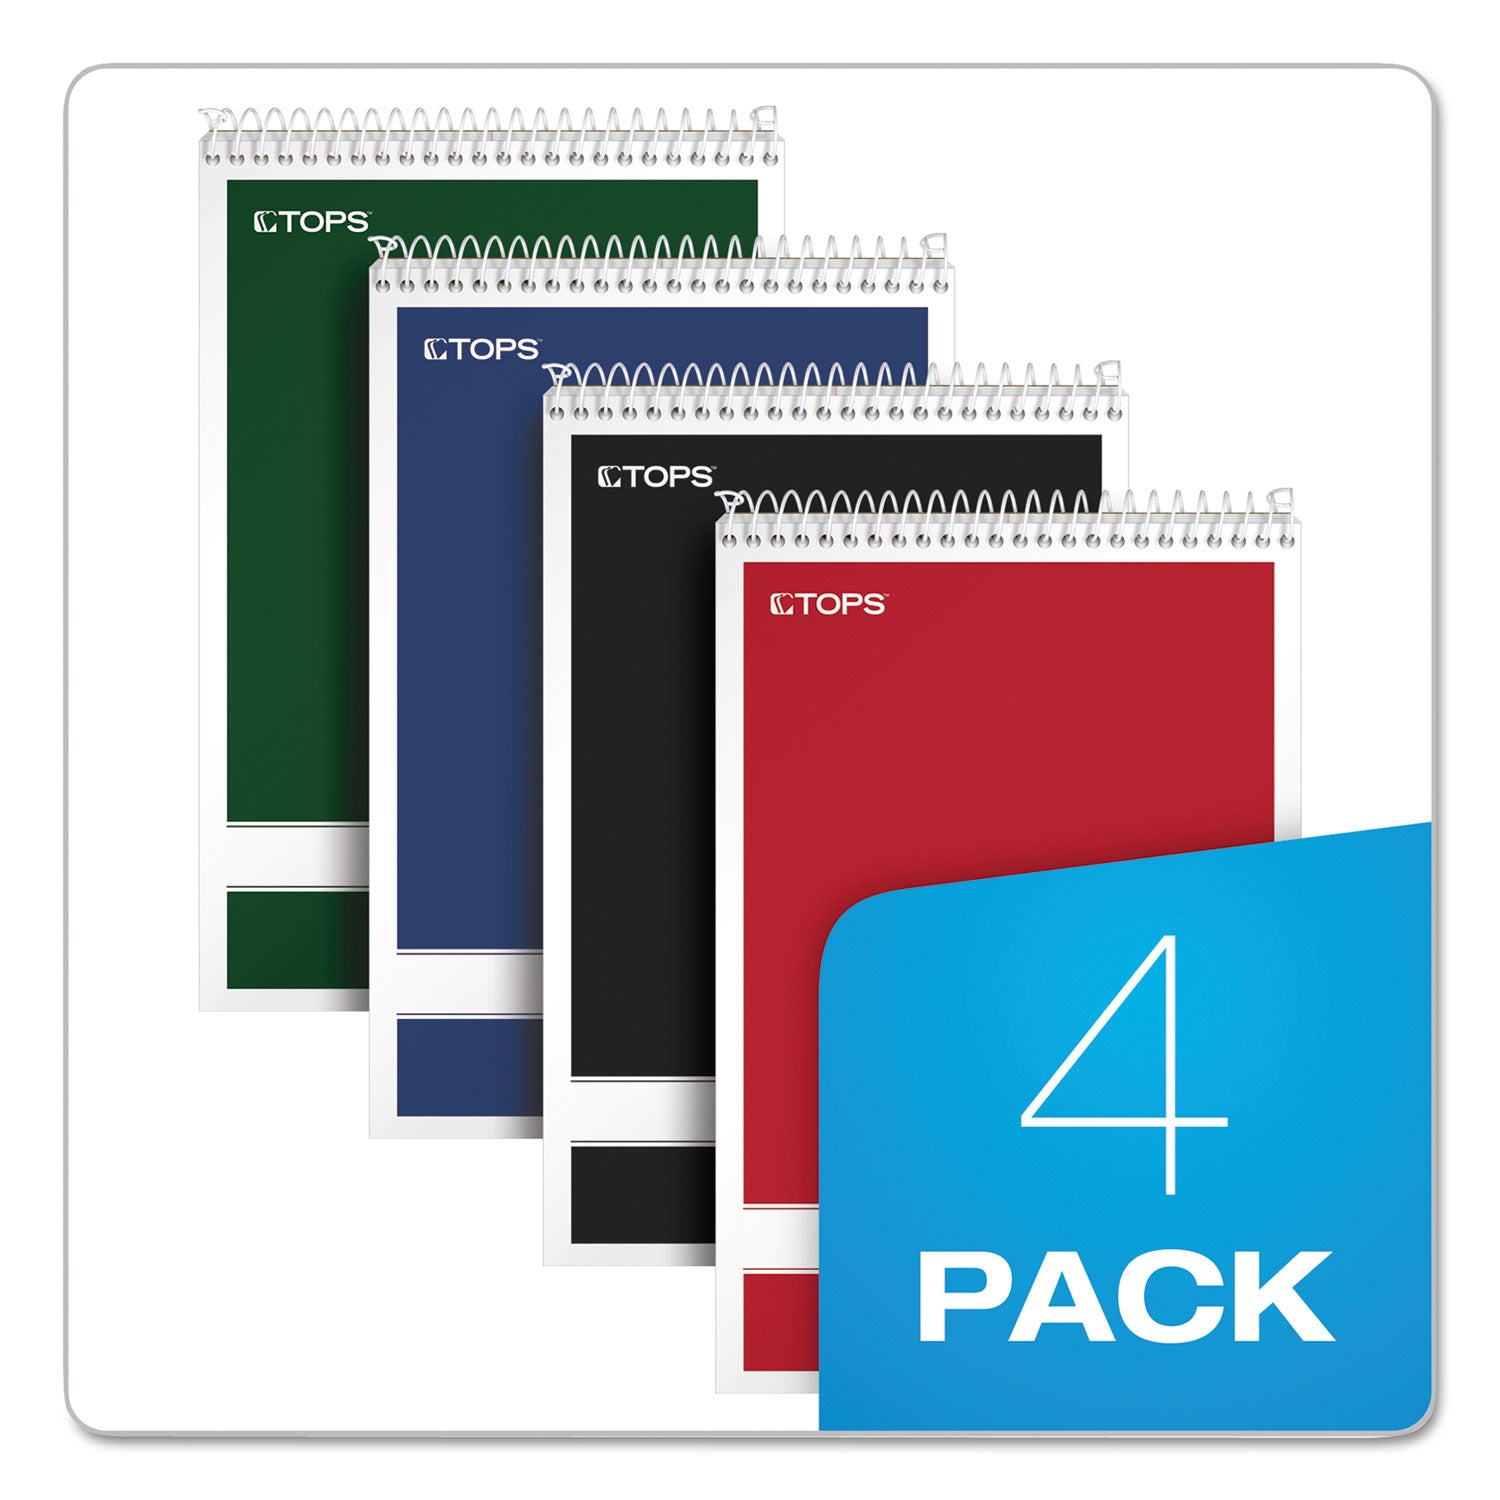 Steno Pad, Gregg Rule, Assorted Cover Colors, 80 White 6 x 9 Sheets, 4/Pack - 